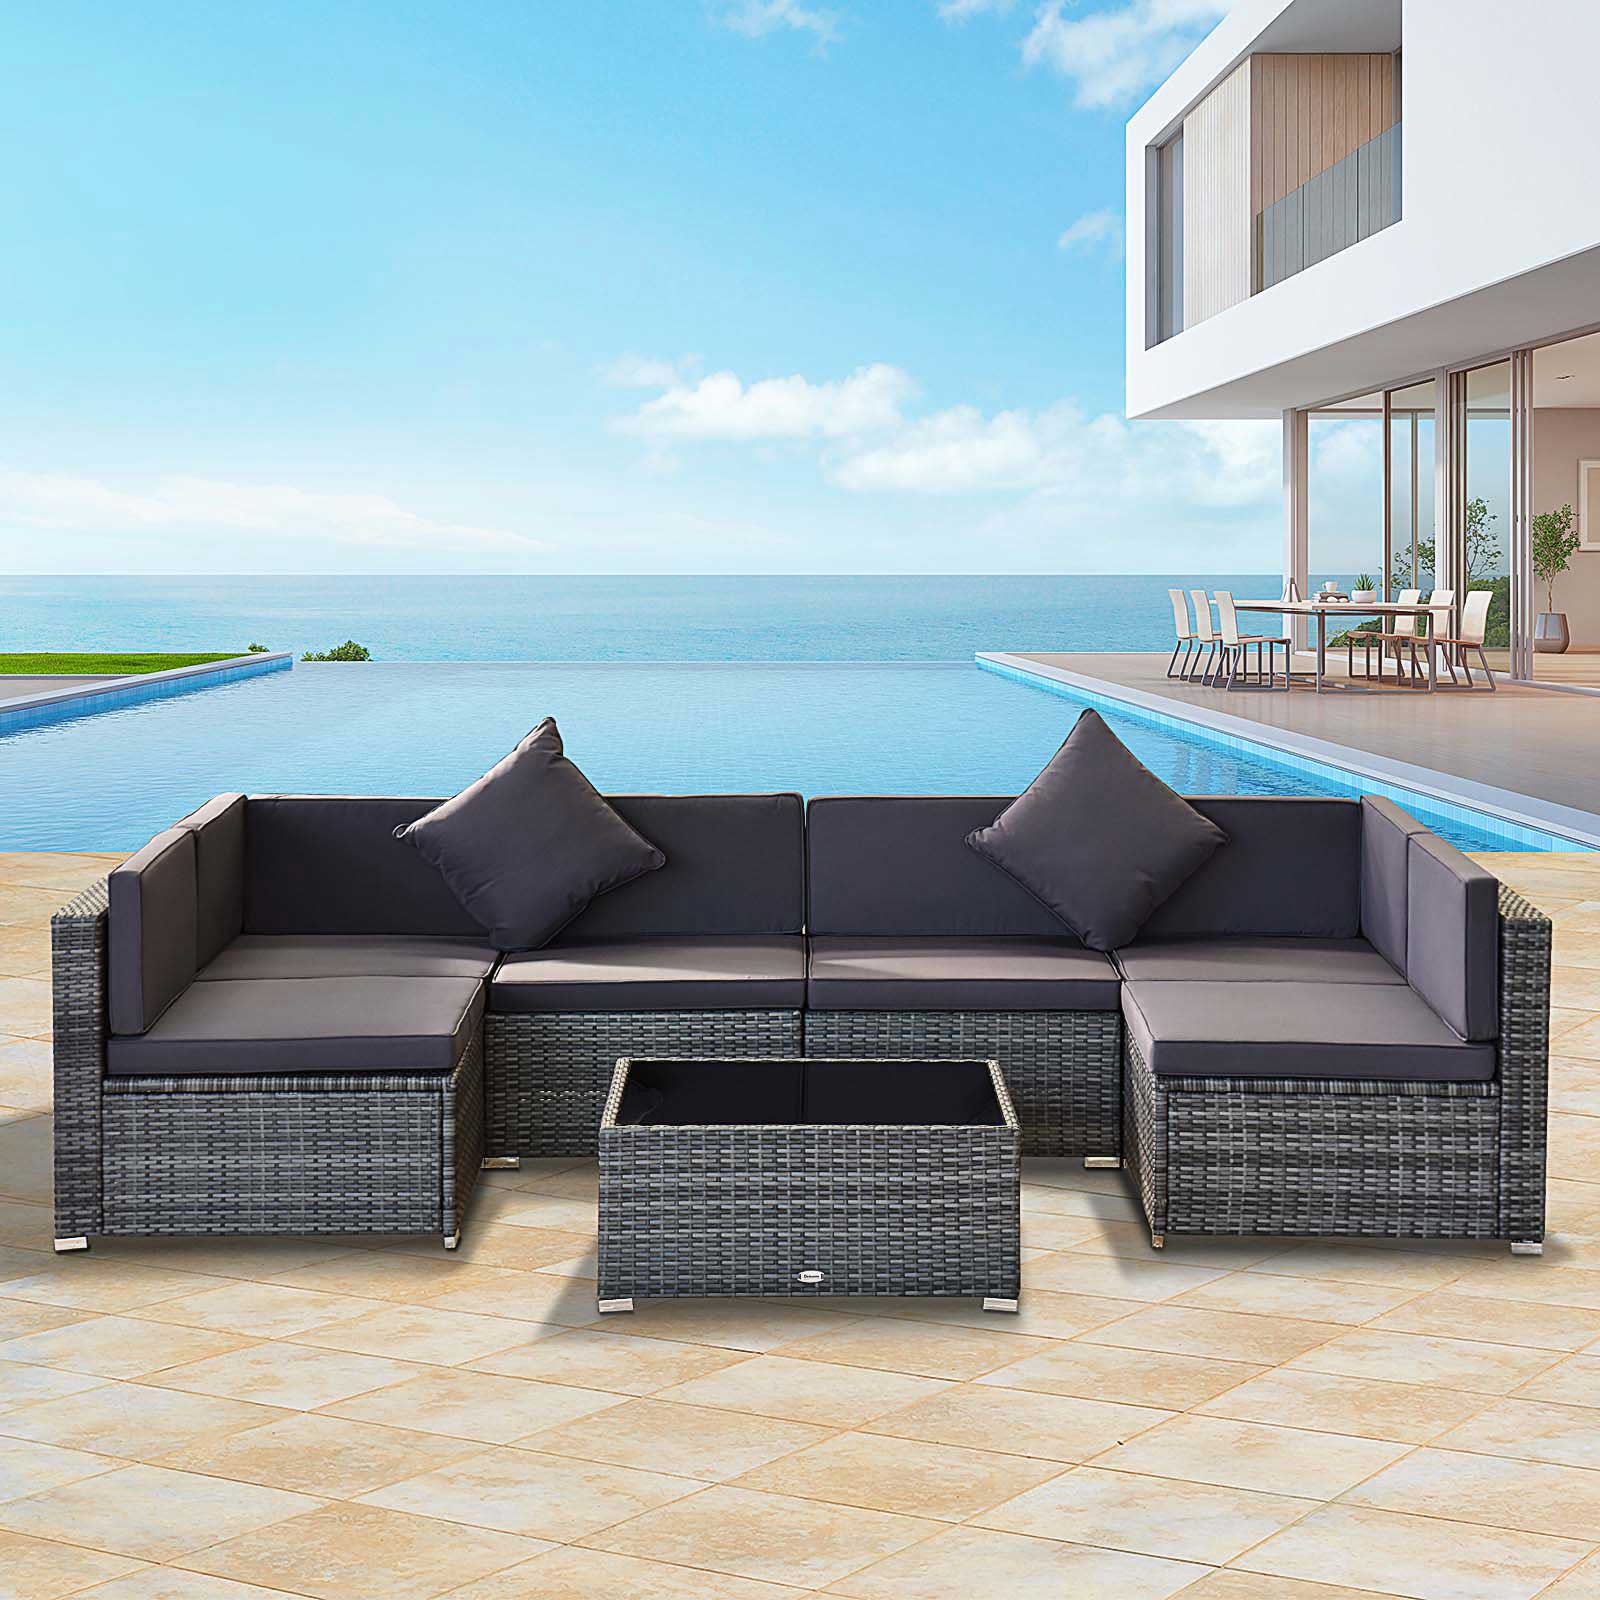 Outsunny 7-Piece Outdoor Patio Furniture Set w/ Rattan Wicker - image 2 of 9